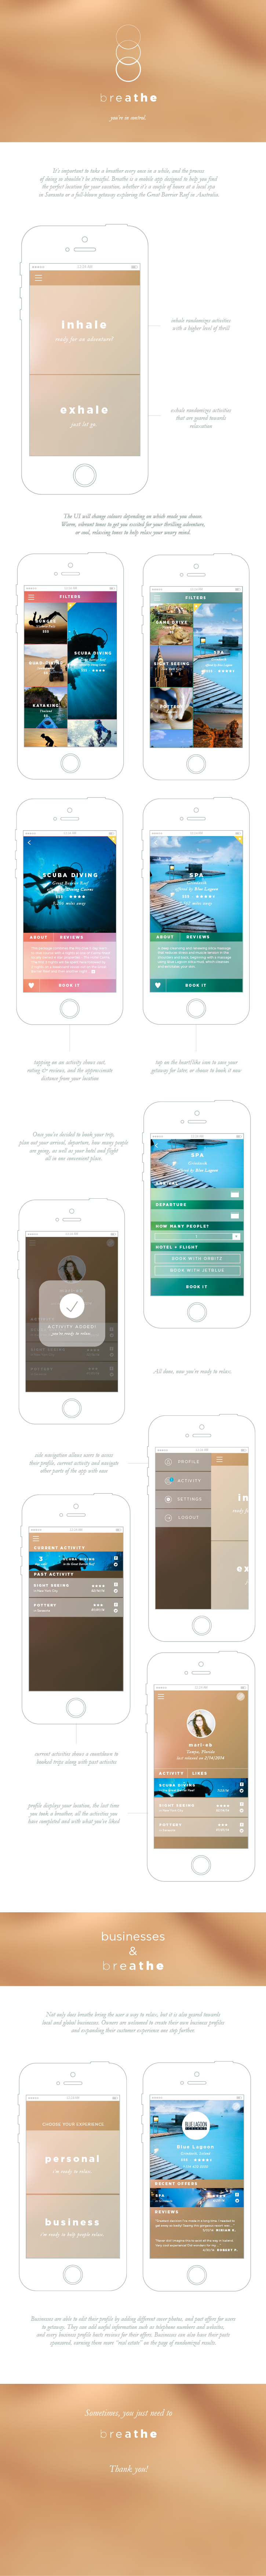 app creative relaxation vacation Booking getaway breathe tebello emma marissa ad interaction mobile iphone android